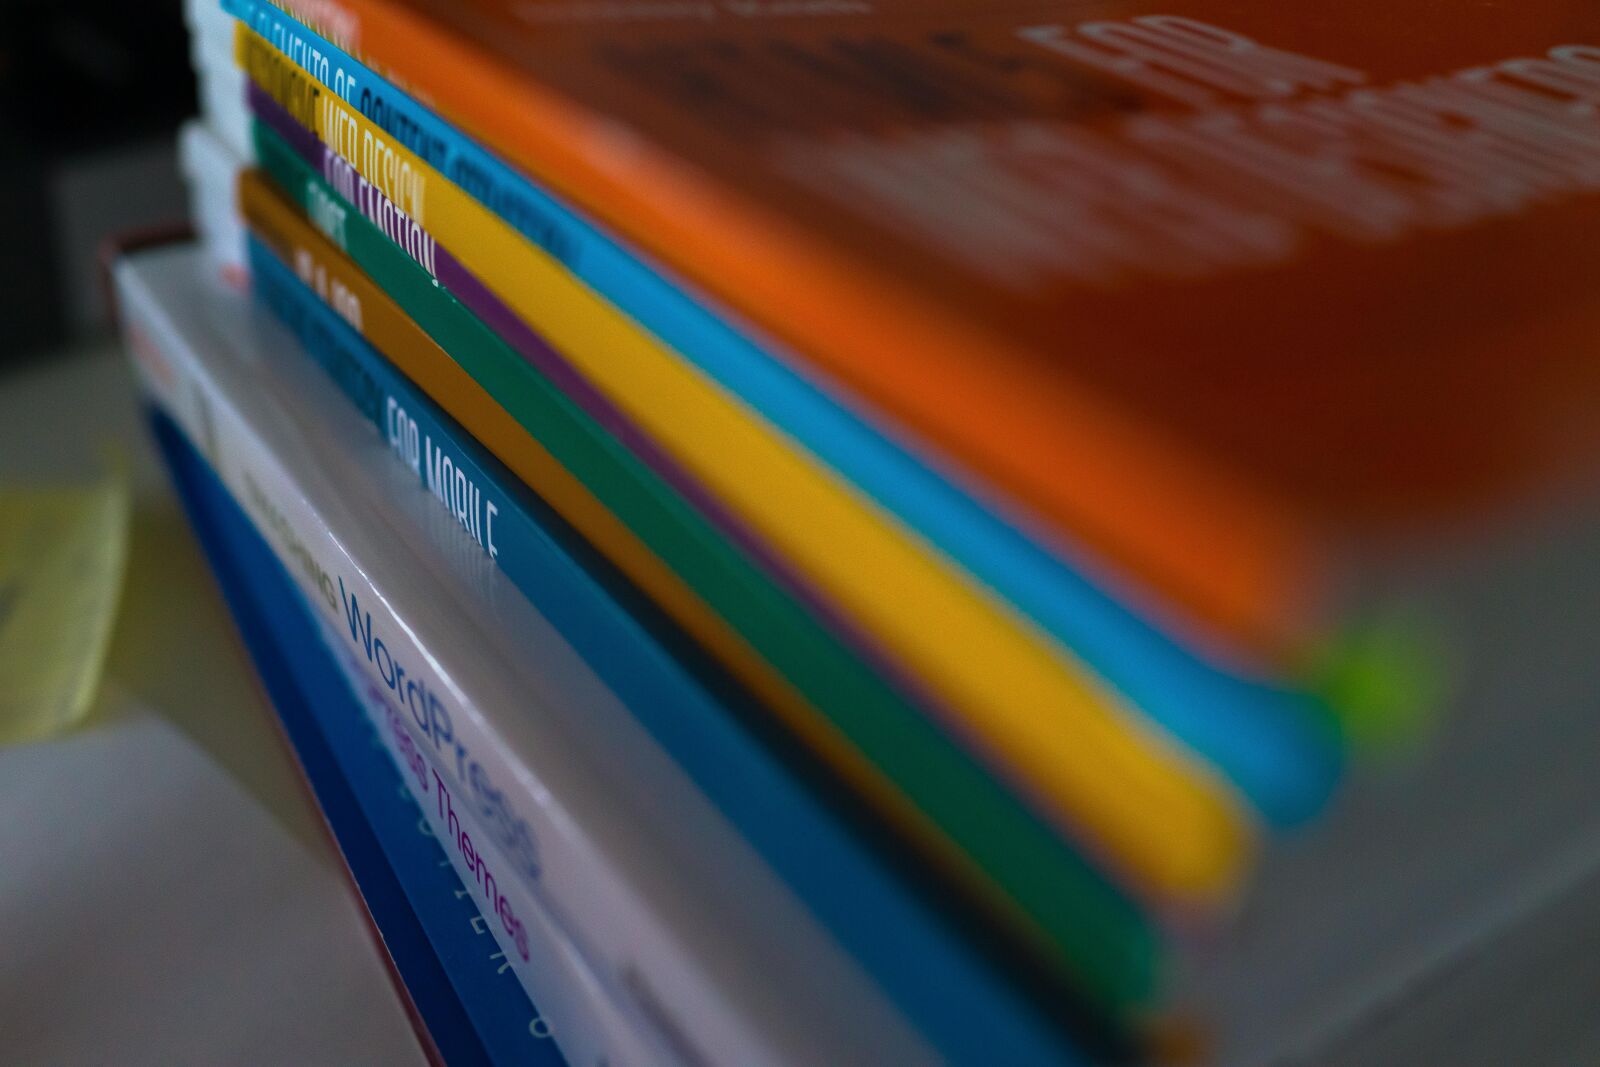 Sony Cyber-shot DSC-RX1 sample photo. Books, book stack, colorful photography